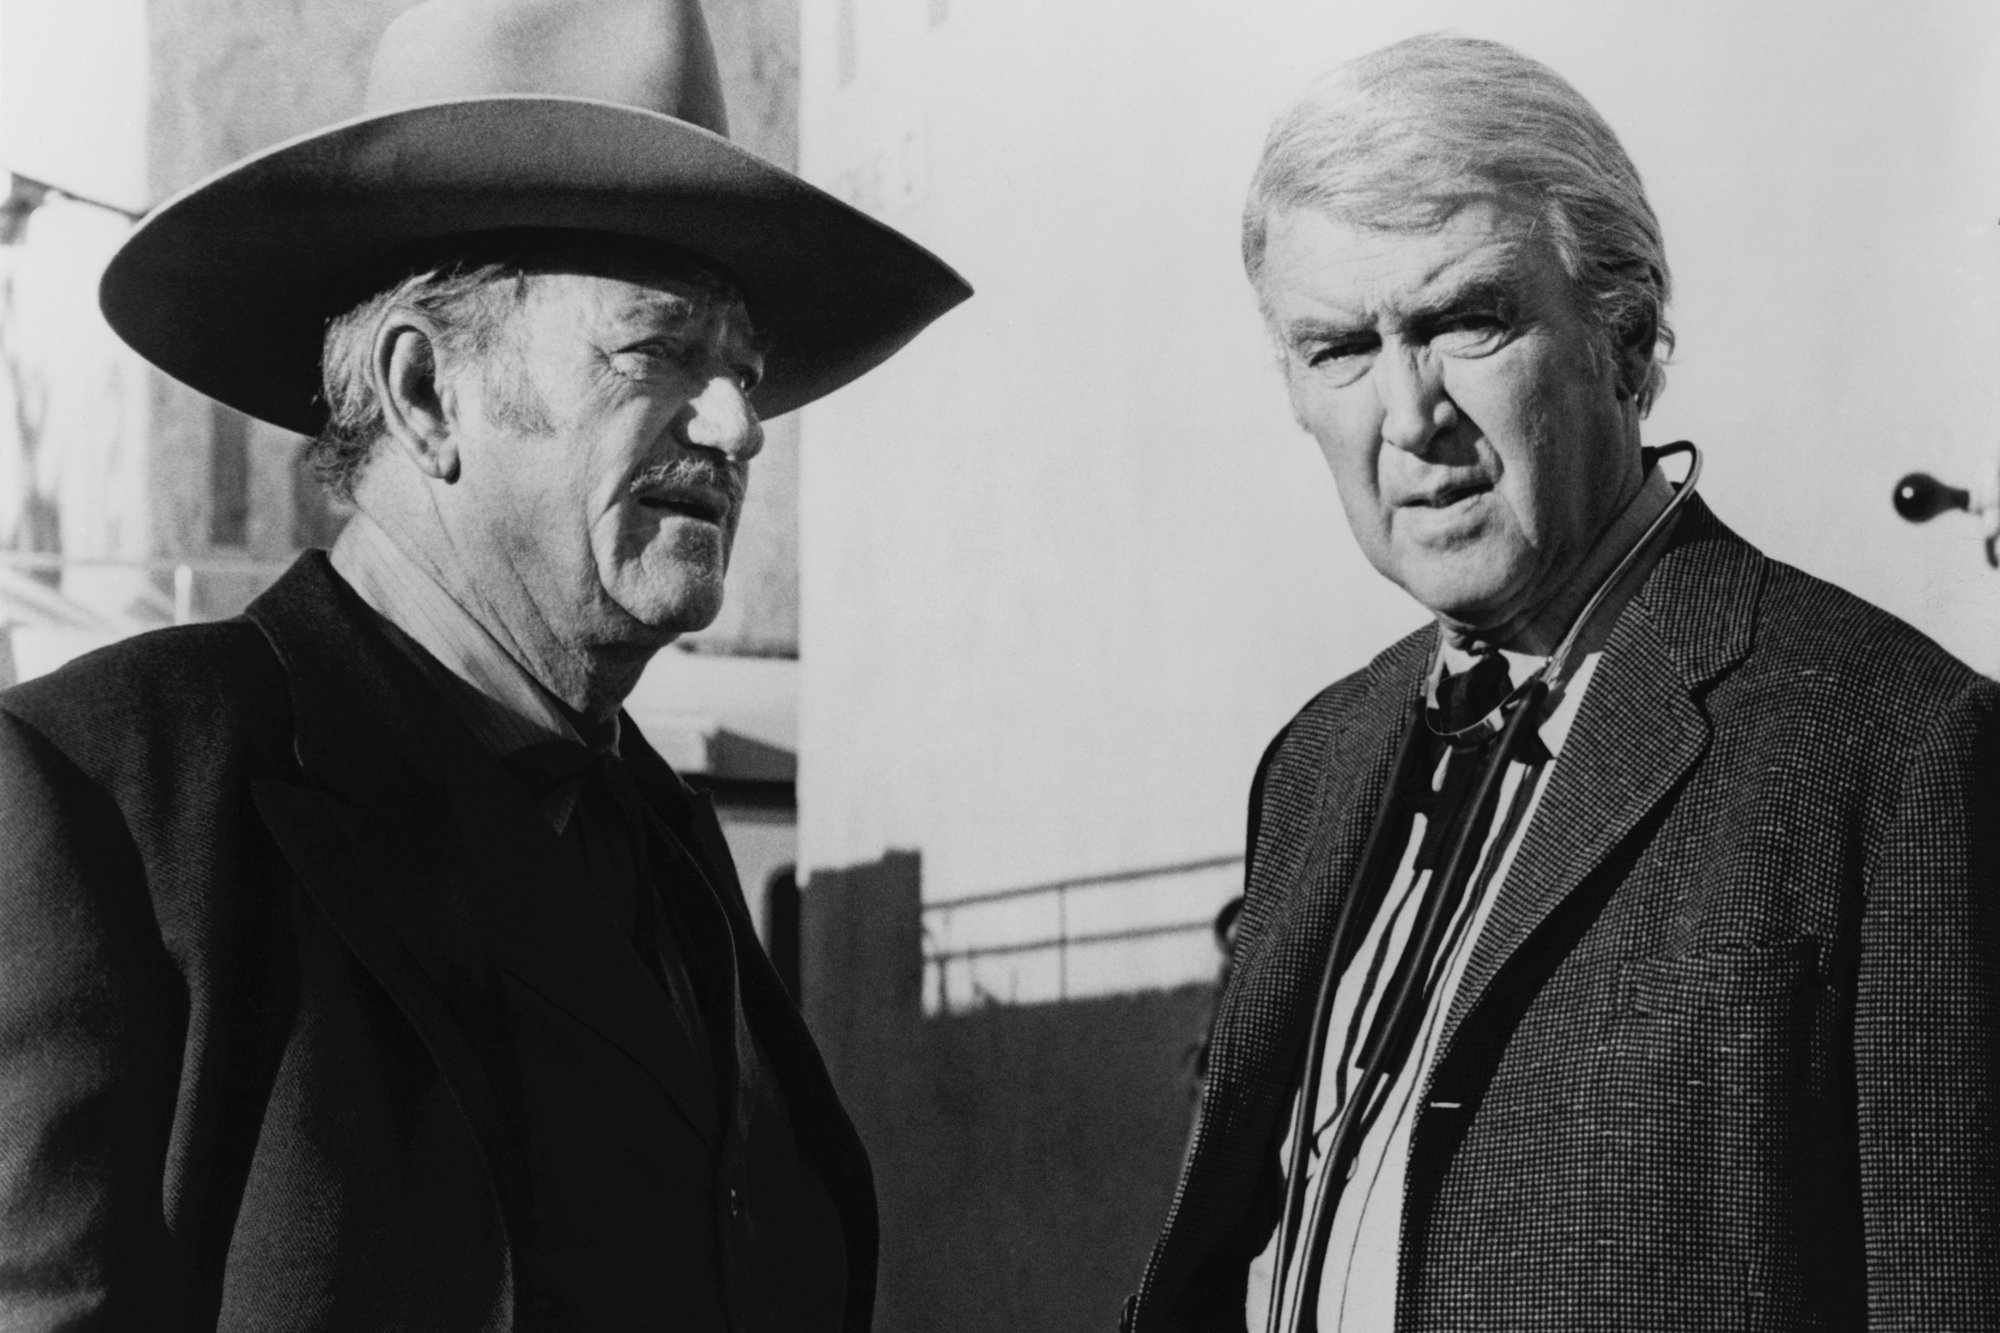 'The Shootist' John Wayne and Jimmy Stewart in black-and-white picture wearing their Western costumes. Stewart is looking at the camera and Wayne is looking off-camera.